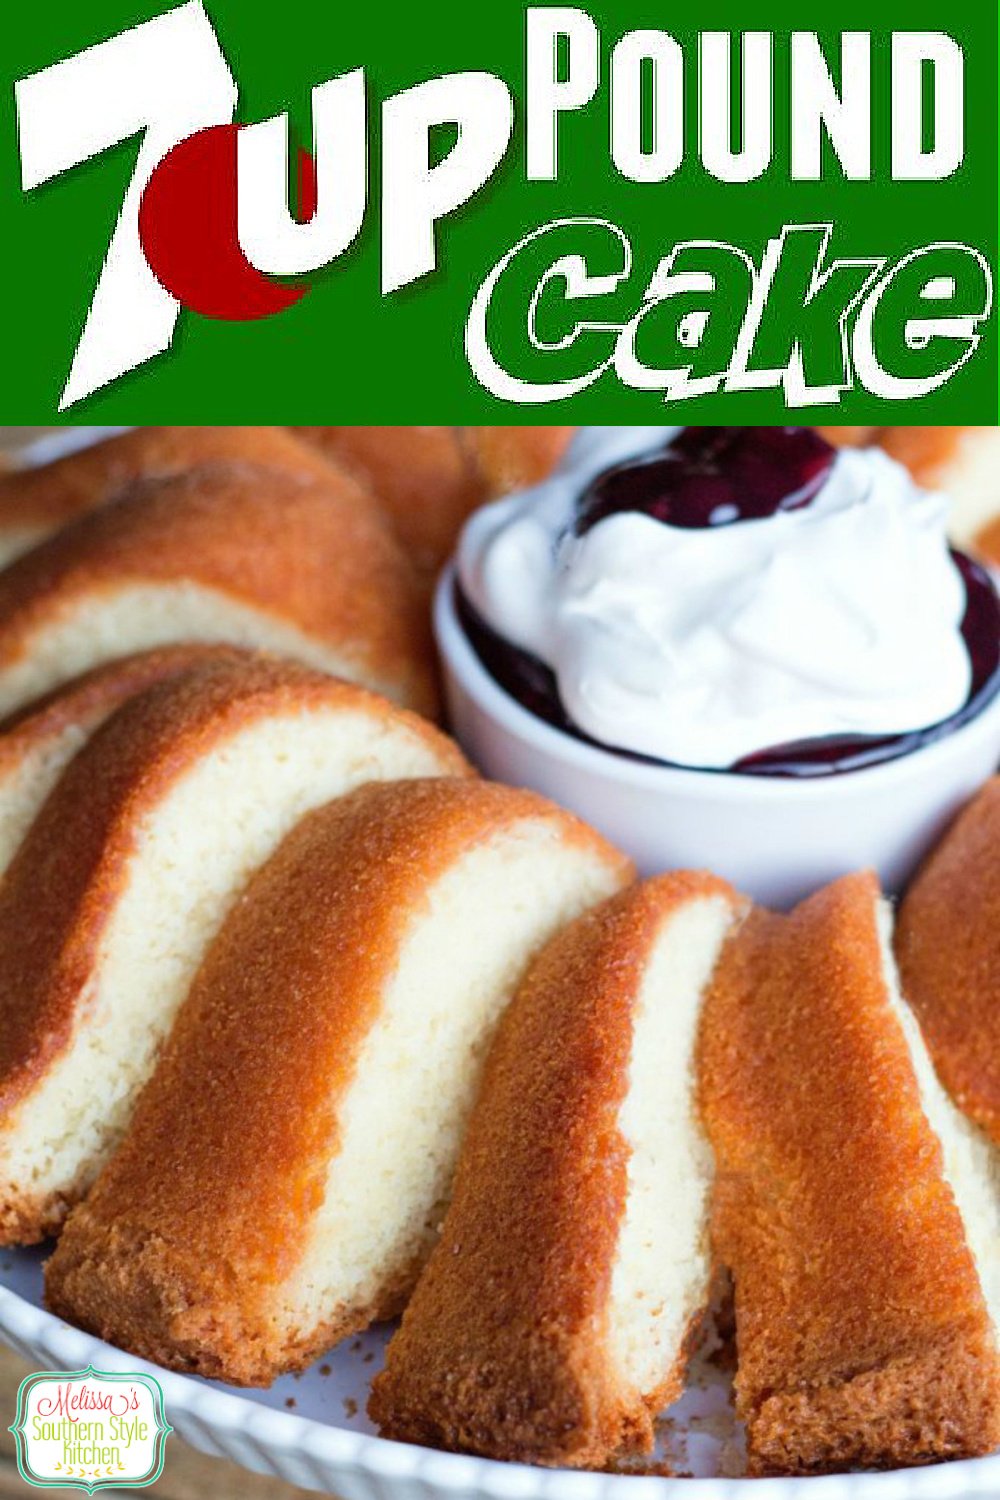 Seve this 7 Up Pound Cake with whipped cream and berries for a sweet ending to any meal #7uppoundcake #poundcakerecipes #bestpoundcakes #cakes #cakerecipes #desserts #dessertfoodrecipes #southernfood #southernrecipes #poundcake #southernpoundcake via @melissasssk